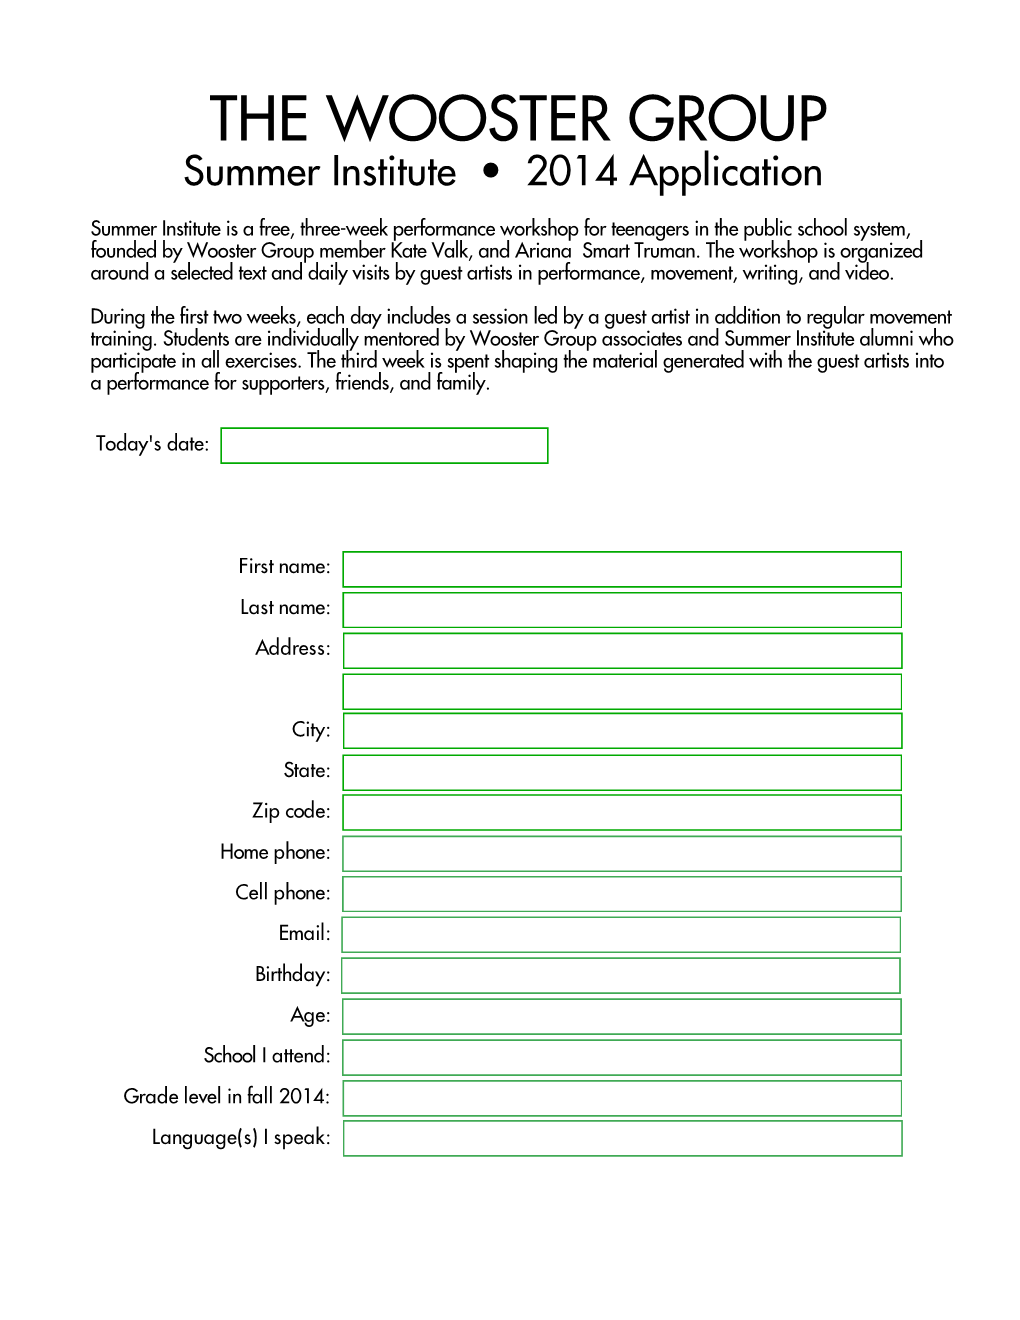 THE WOOSTER GROUP Summer Institute • 2014 Application